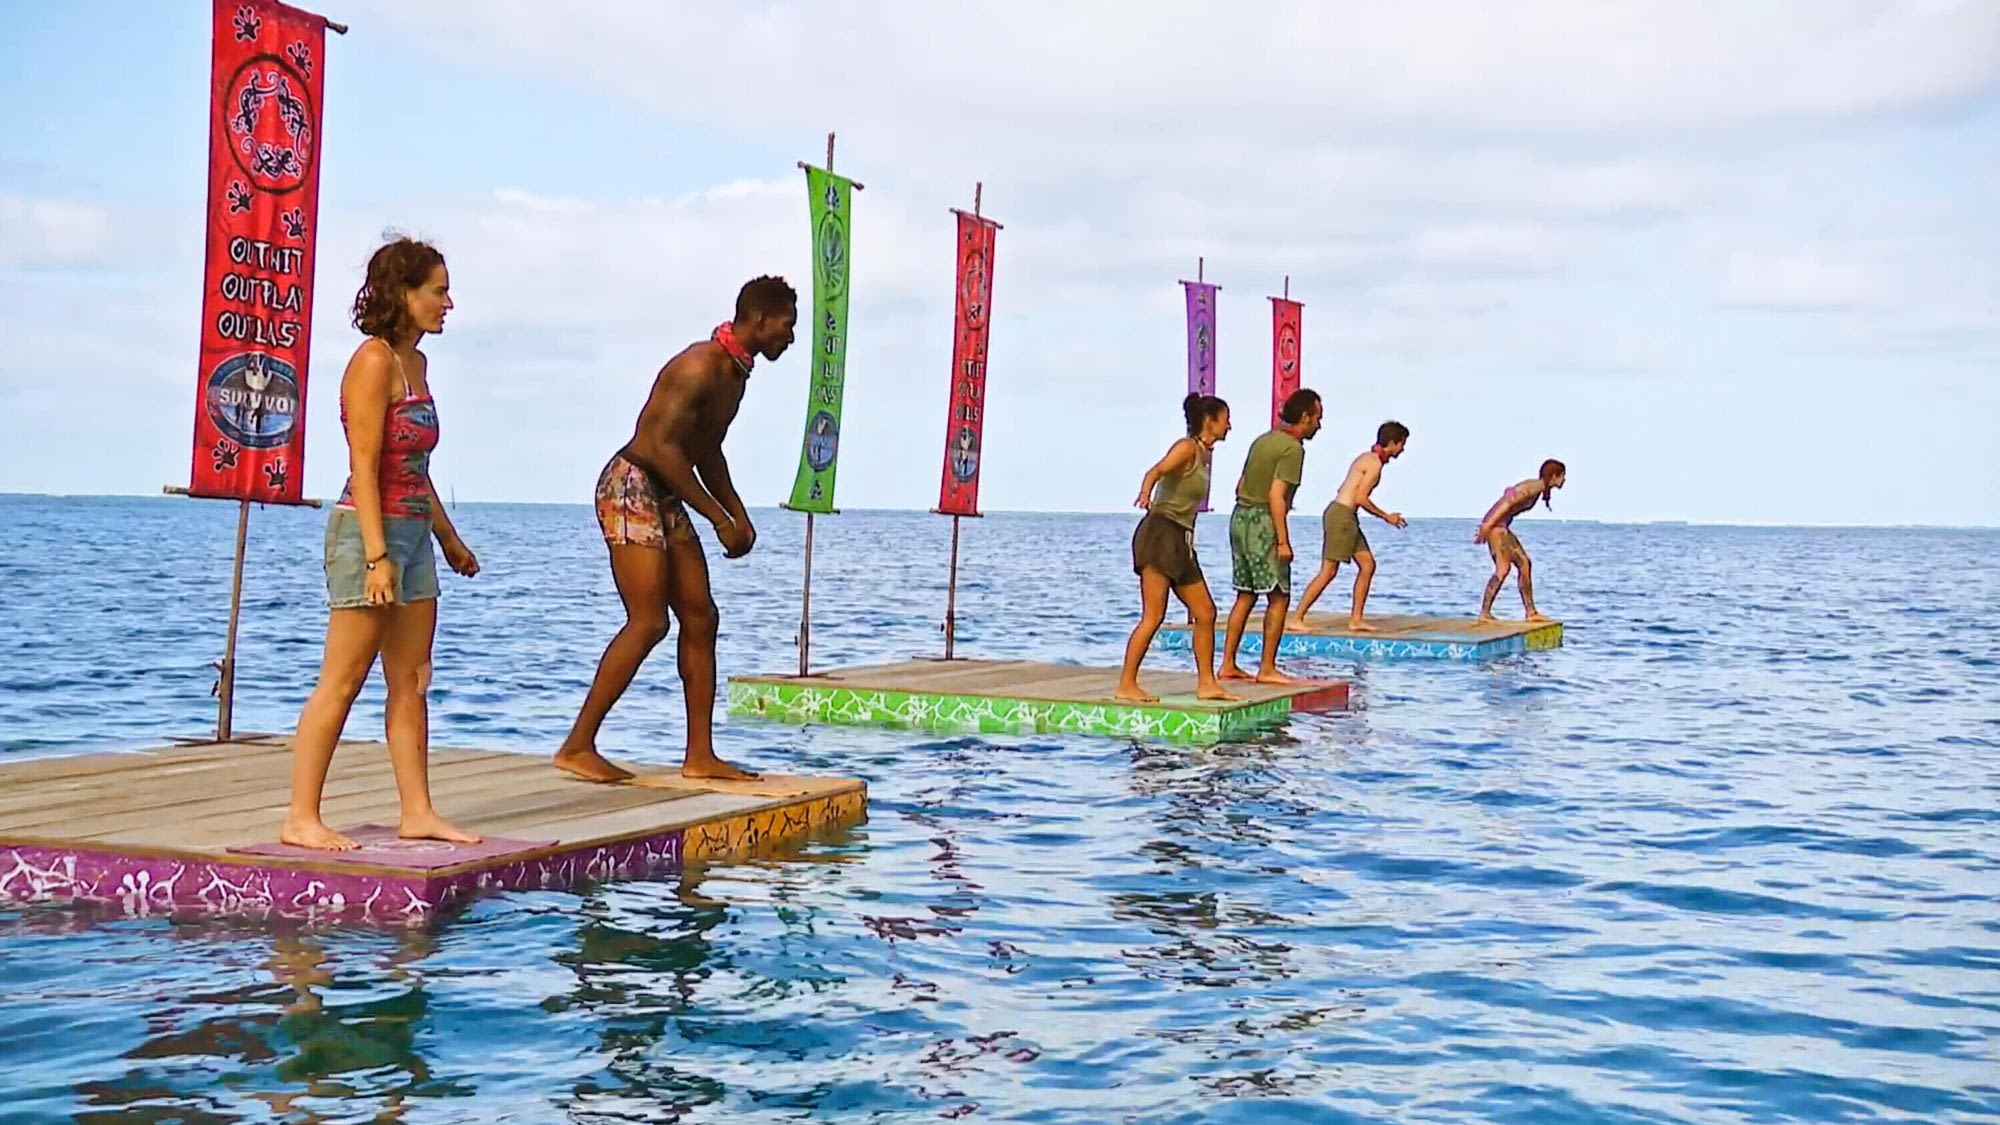 ‘Survivor’ Season 46, Episode 12 Recap: Top 5 Revealed as Another Player Goes Home With Immunity Idol